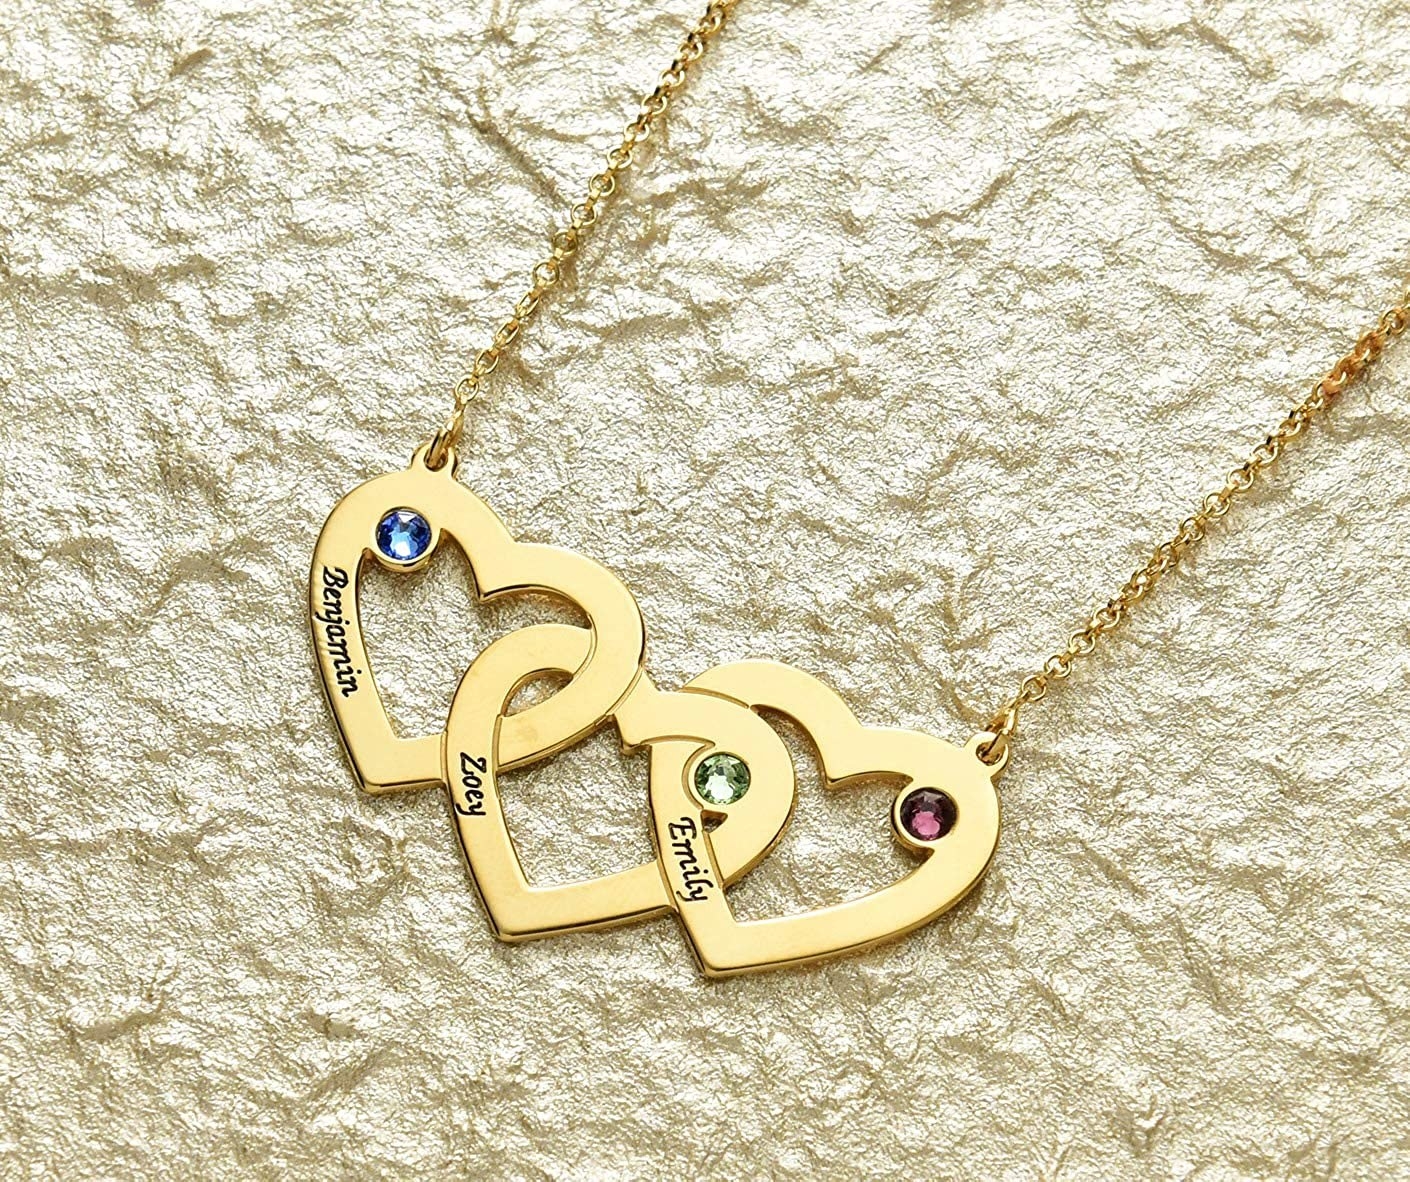 FamilyGift Necklace with Name Wife Perla Pendant Necklace The Love of My Life Strong Caring Thoughtful A Great Provider an Awesome Mother My Lover and Best Friend 